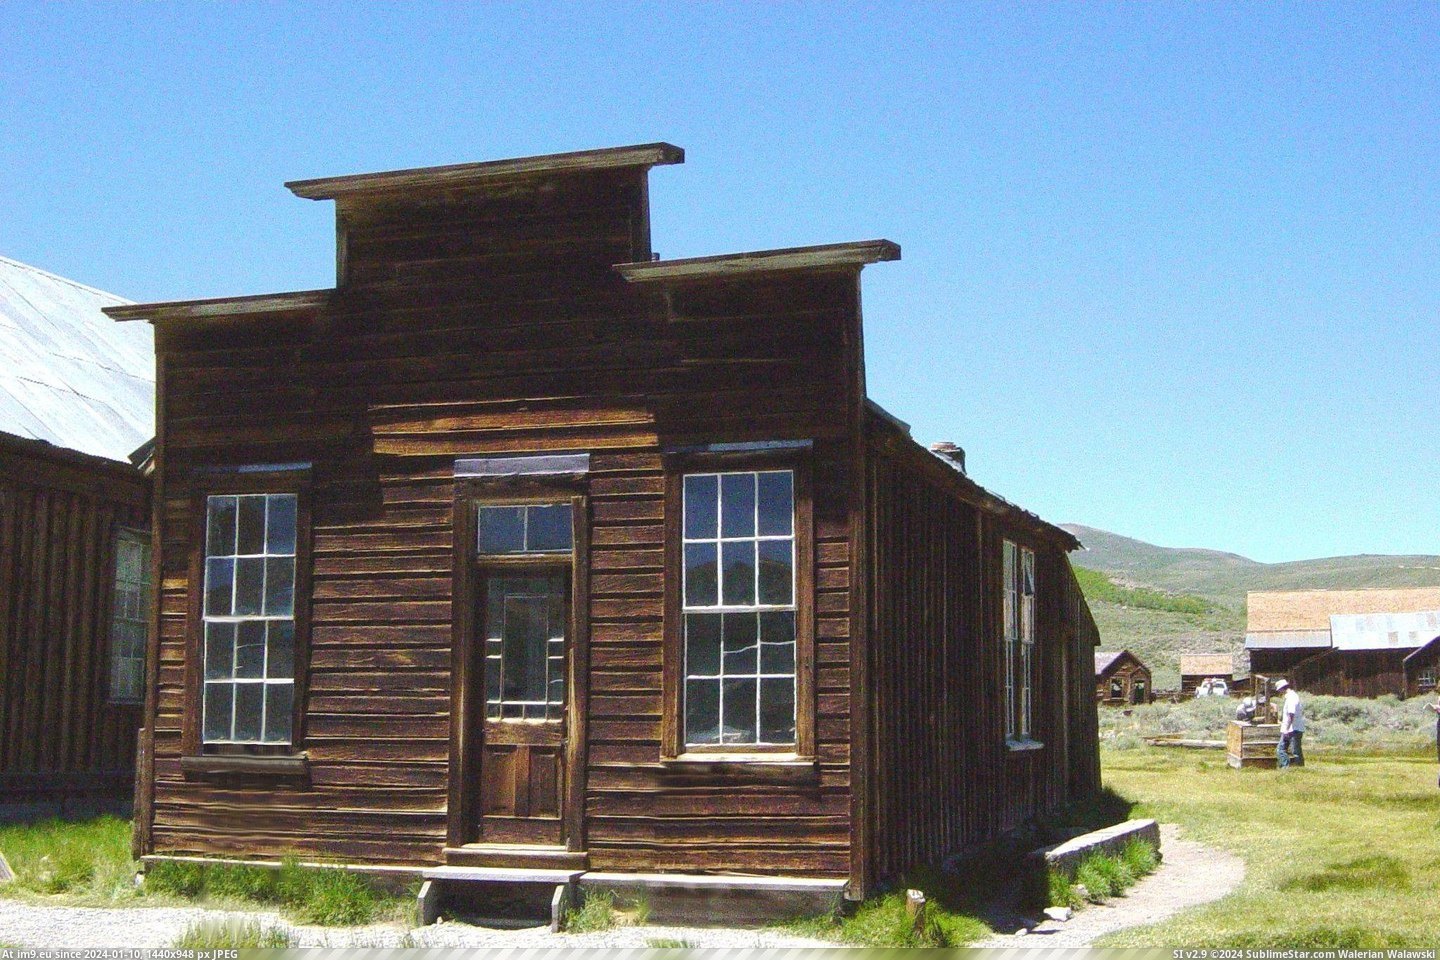 #California #Morgue #Bodie Morgue In Bodie, California Pic. (Изображение из альбом Bodie - a ghost town in Eastern California))